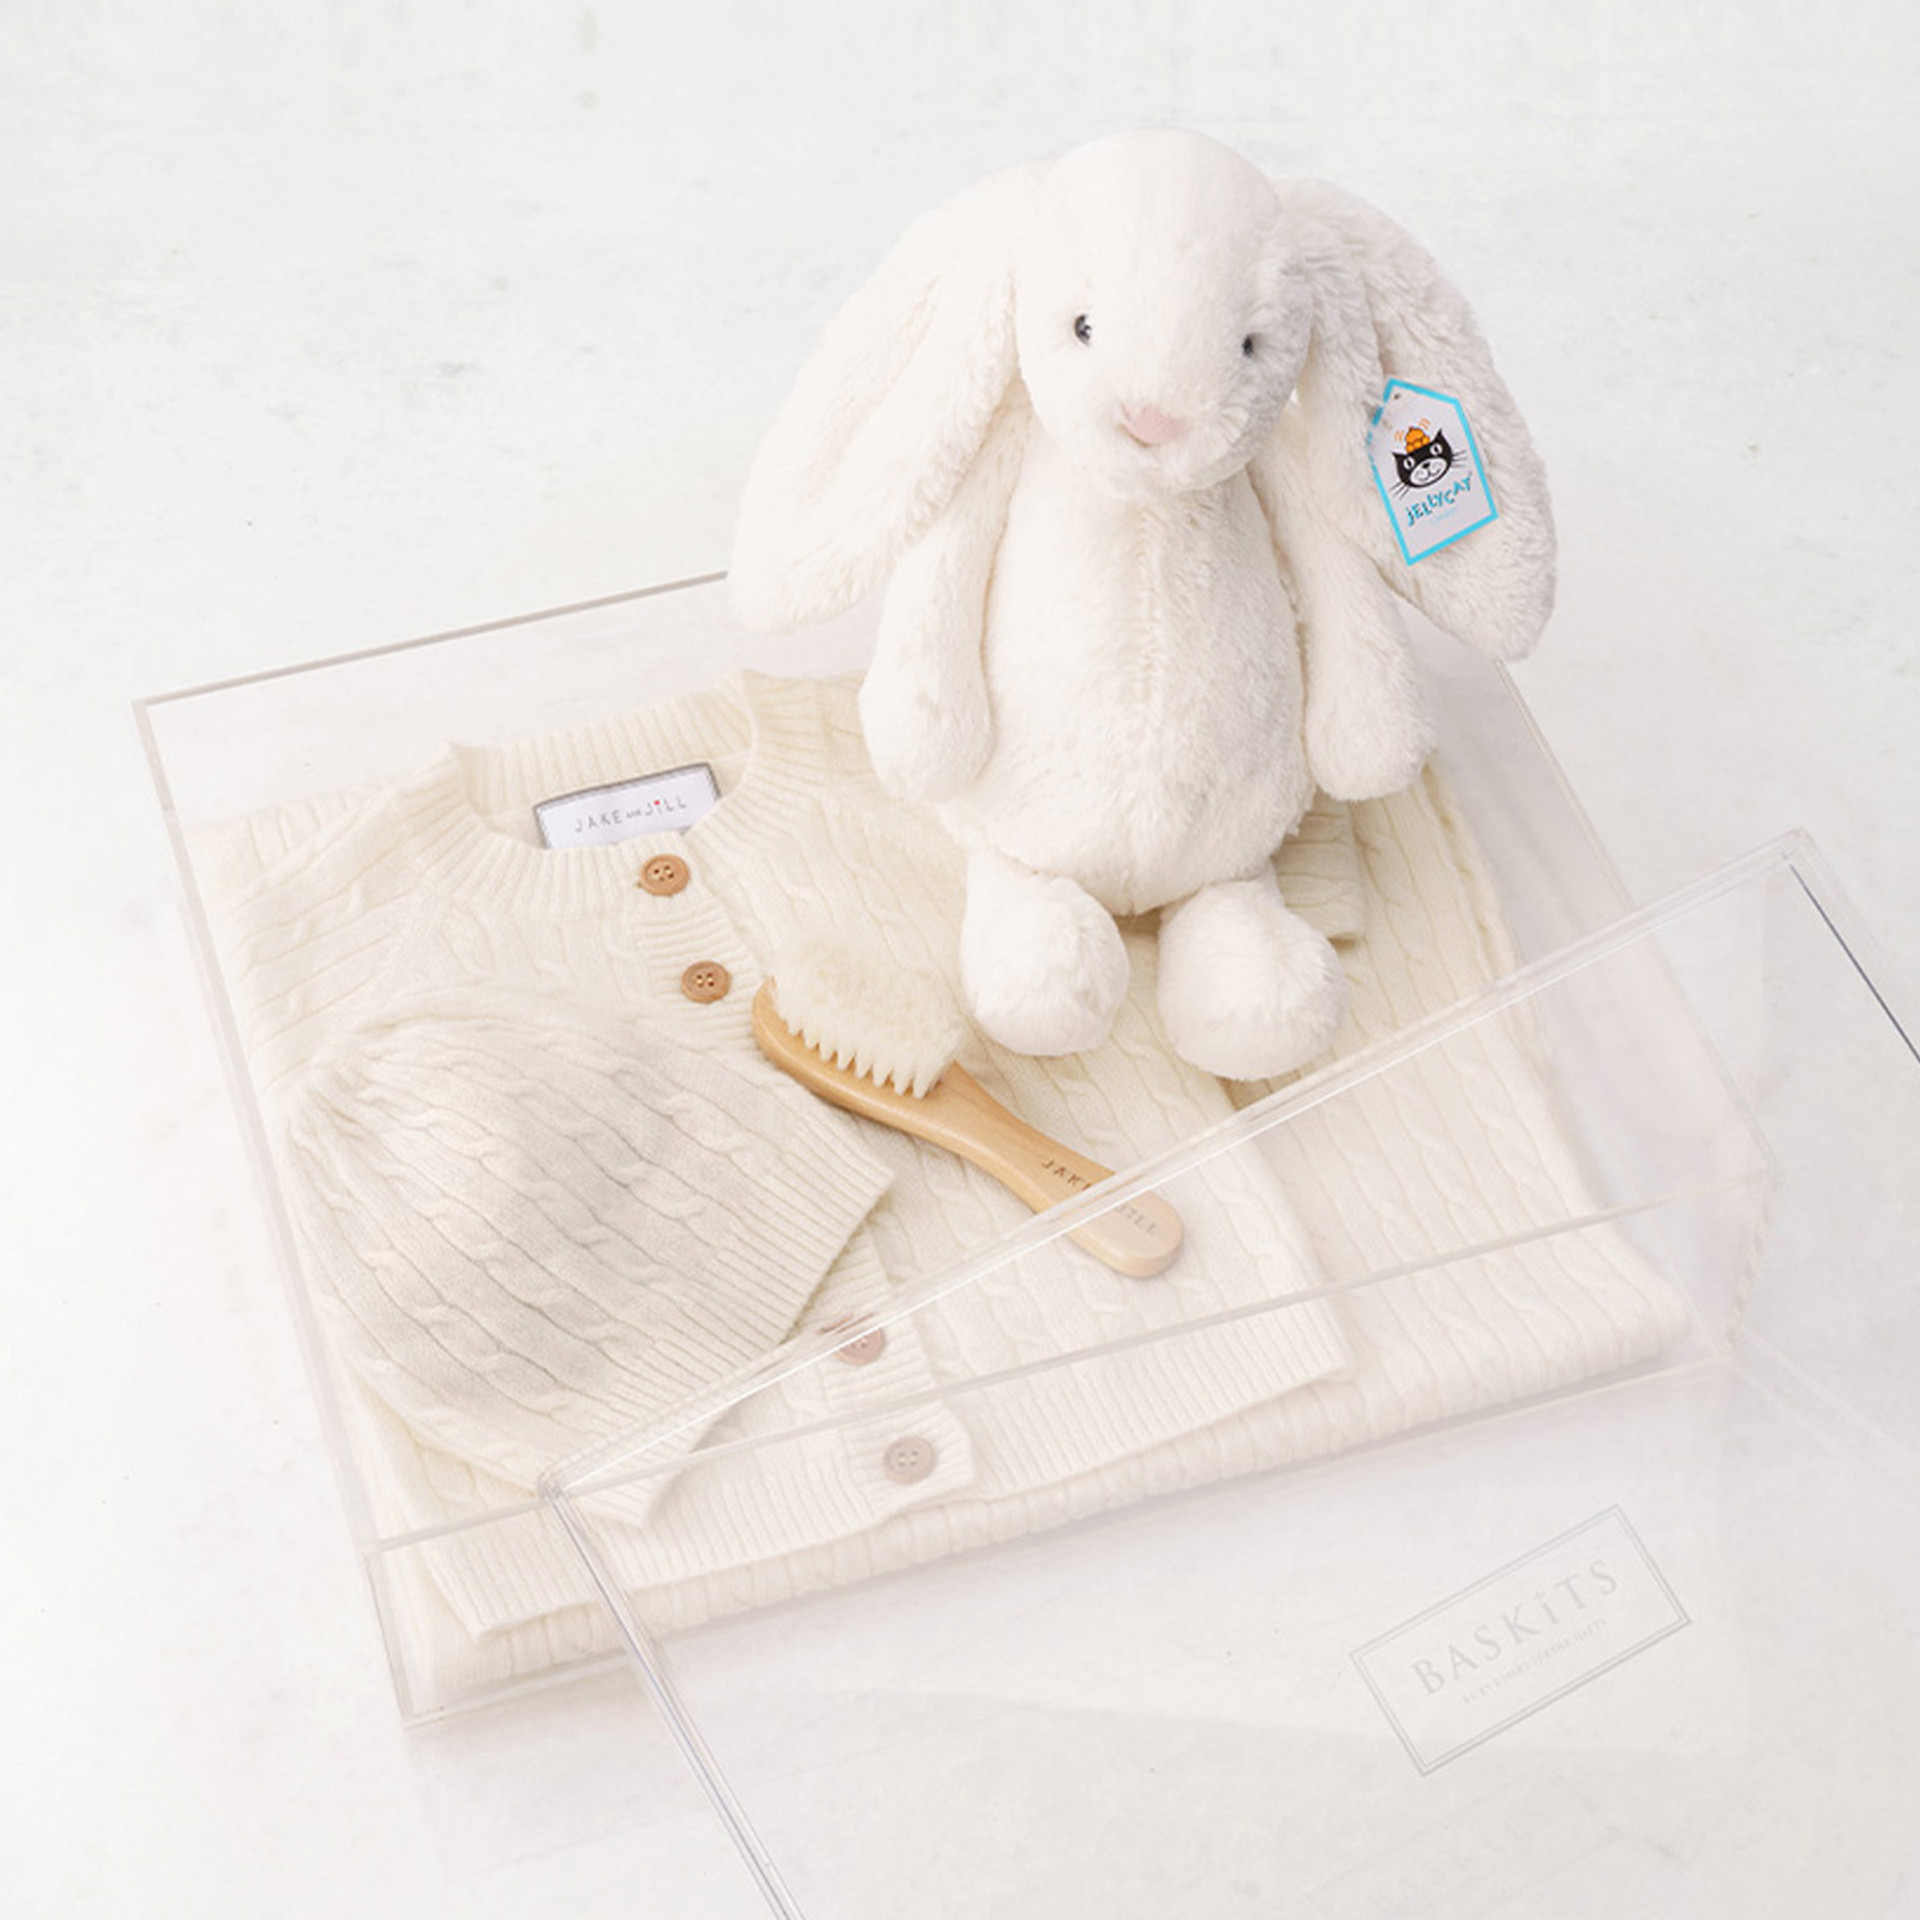 Baby Luxe gift set